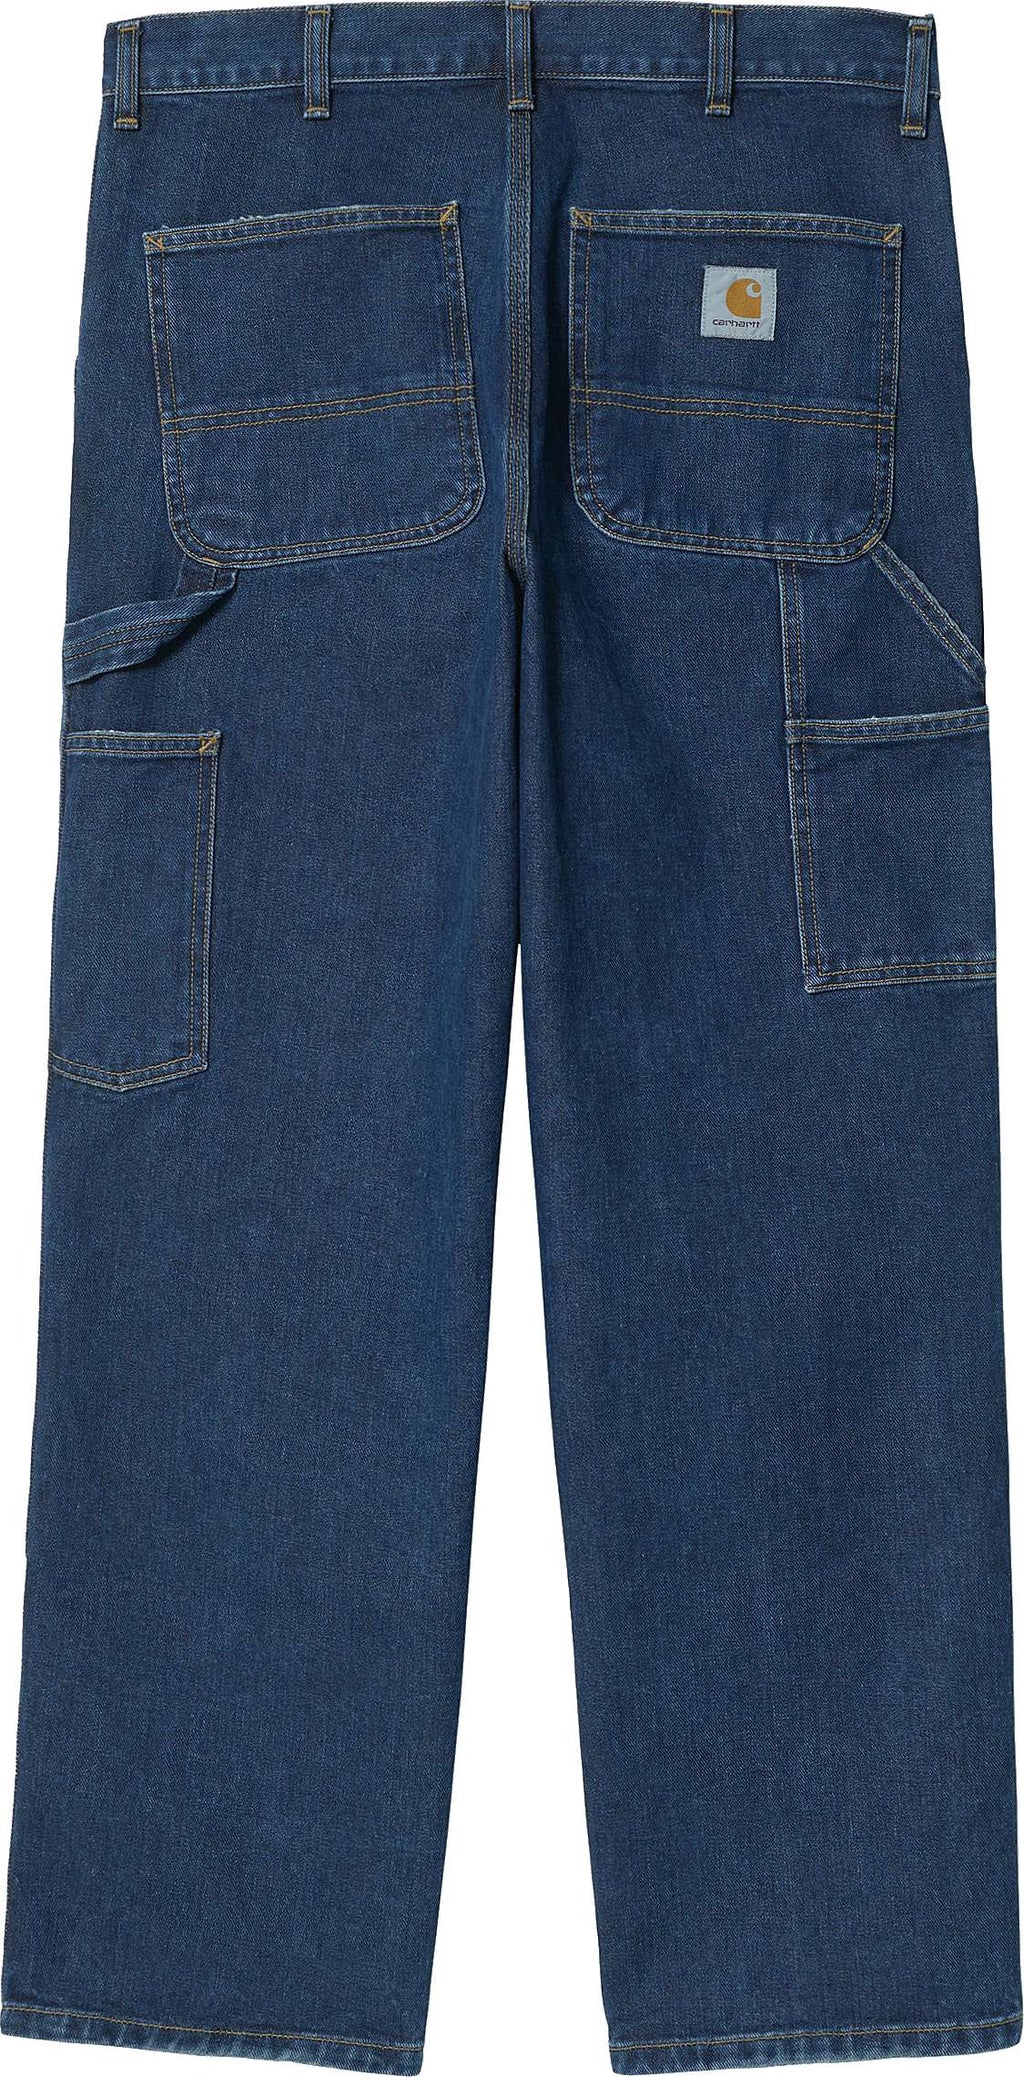  Carhartt Wip Jeans Double Knee Pant Blue Stone Washed Uomo - 2